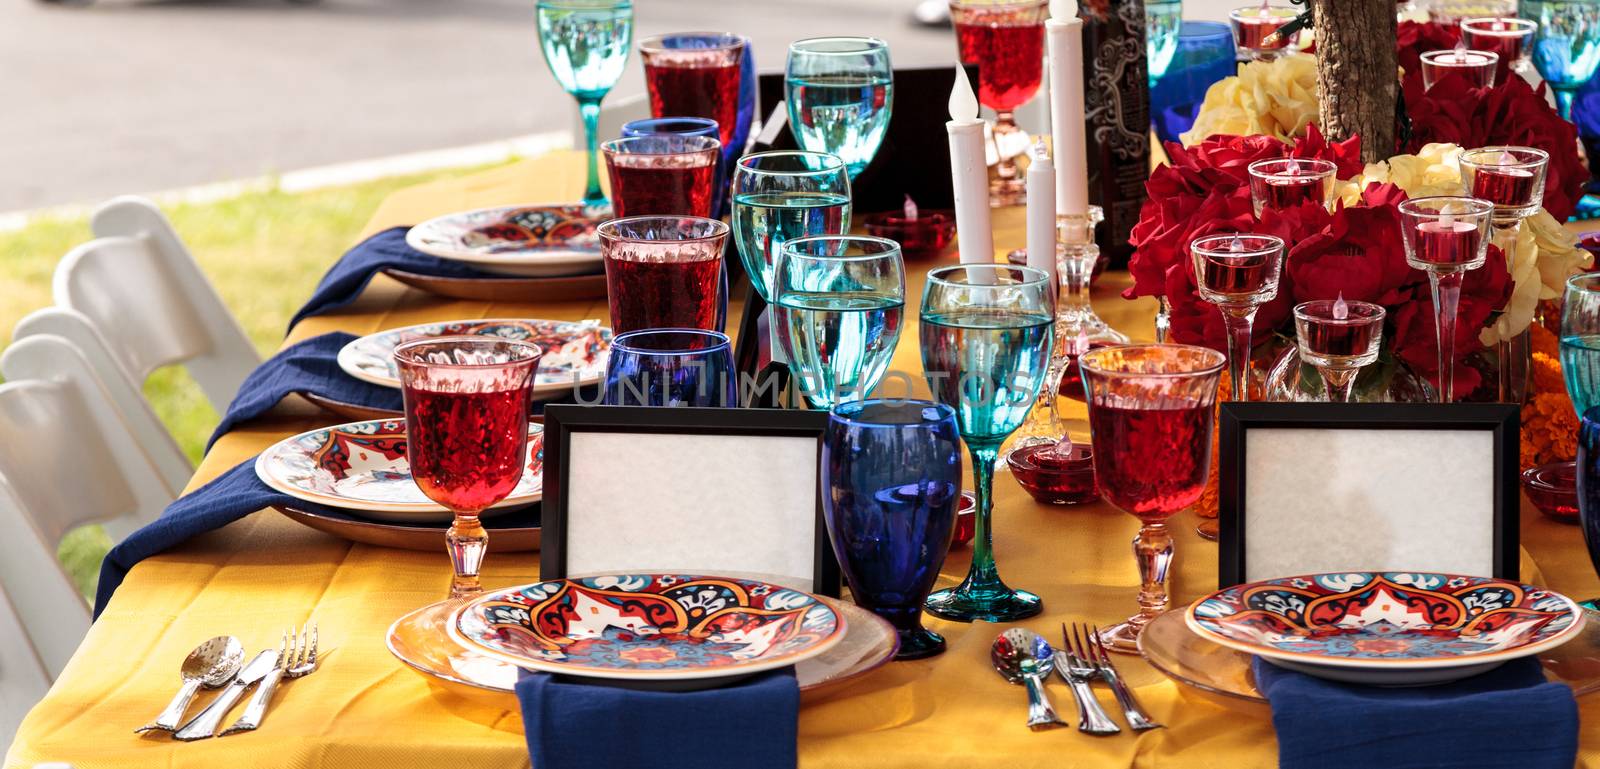 Red and royal blue table setting by steffstarr